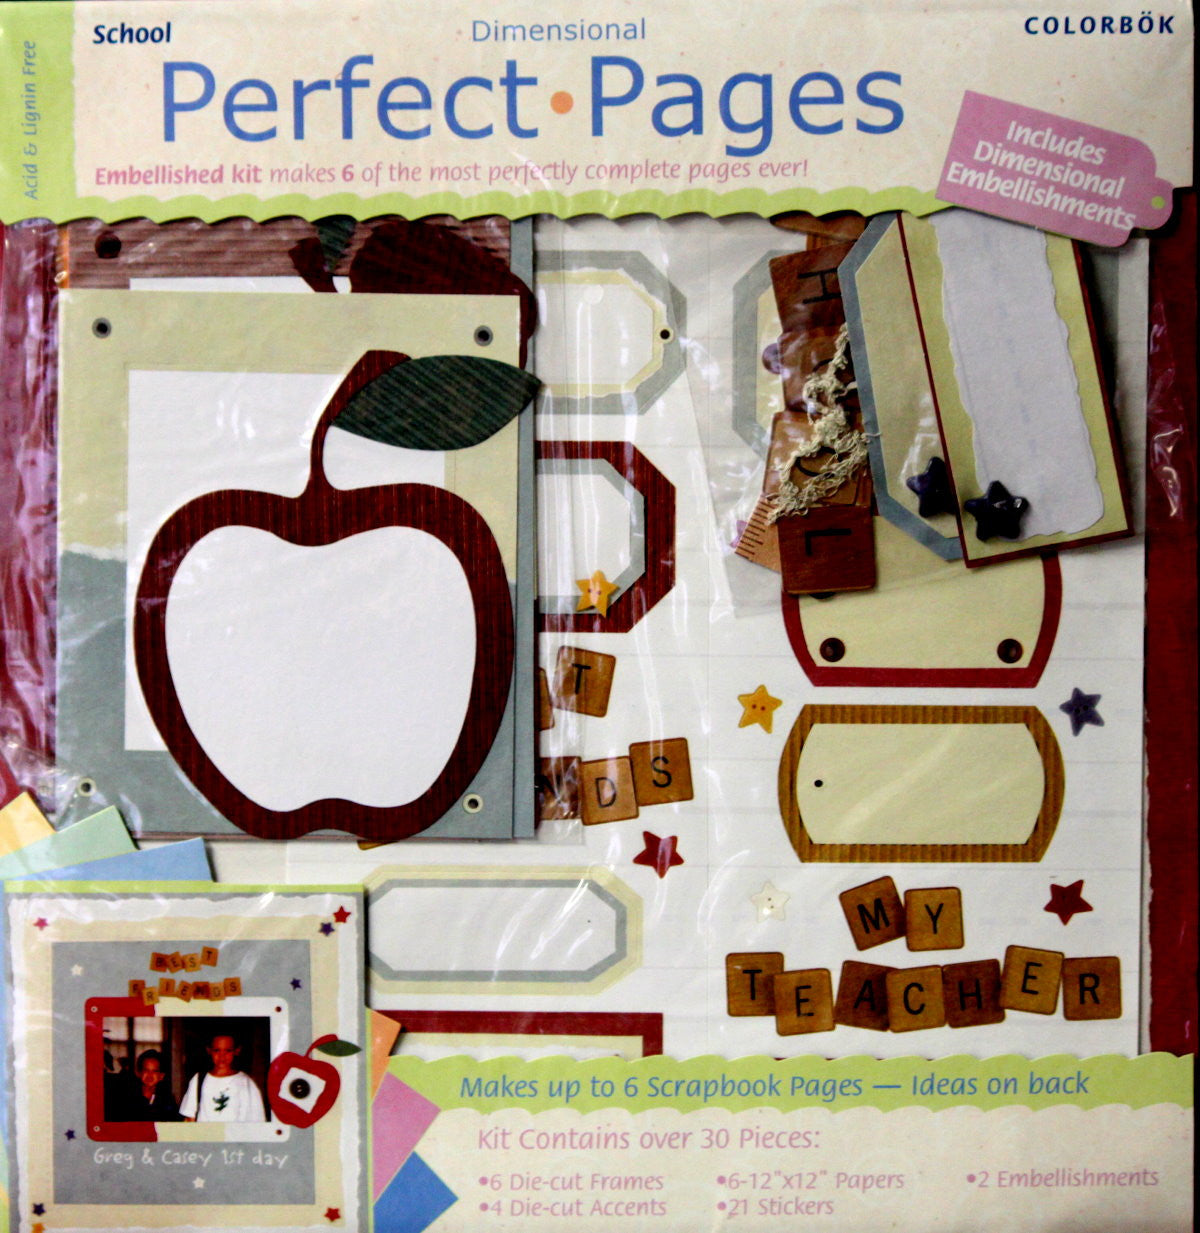 Colorbok Perfect Pages 12 x 12 School Dimensional Scrapbook Pages Kit - SCRAPBOOKFARE